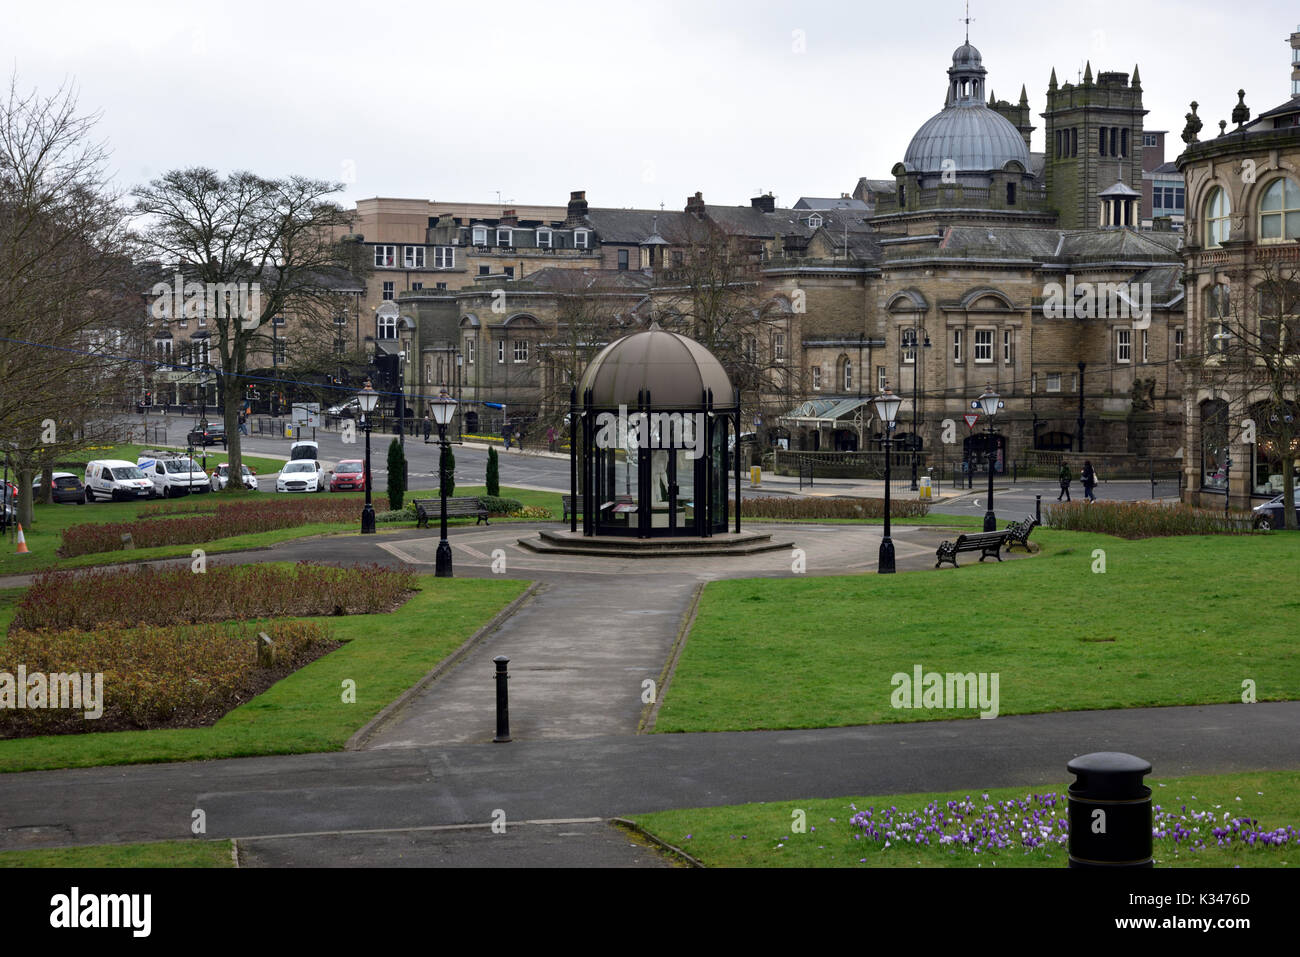 LANDSCAPE Harrogate is a spa town in North Yorkshire, England. Historically in the West Riding of Yorkshire, the town is a tourist destination and its Stock Photo